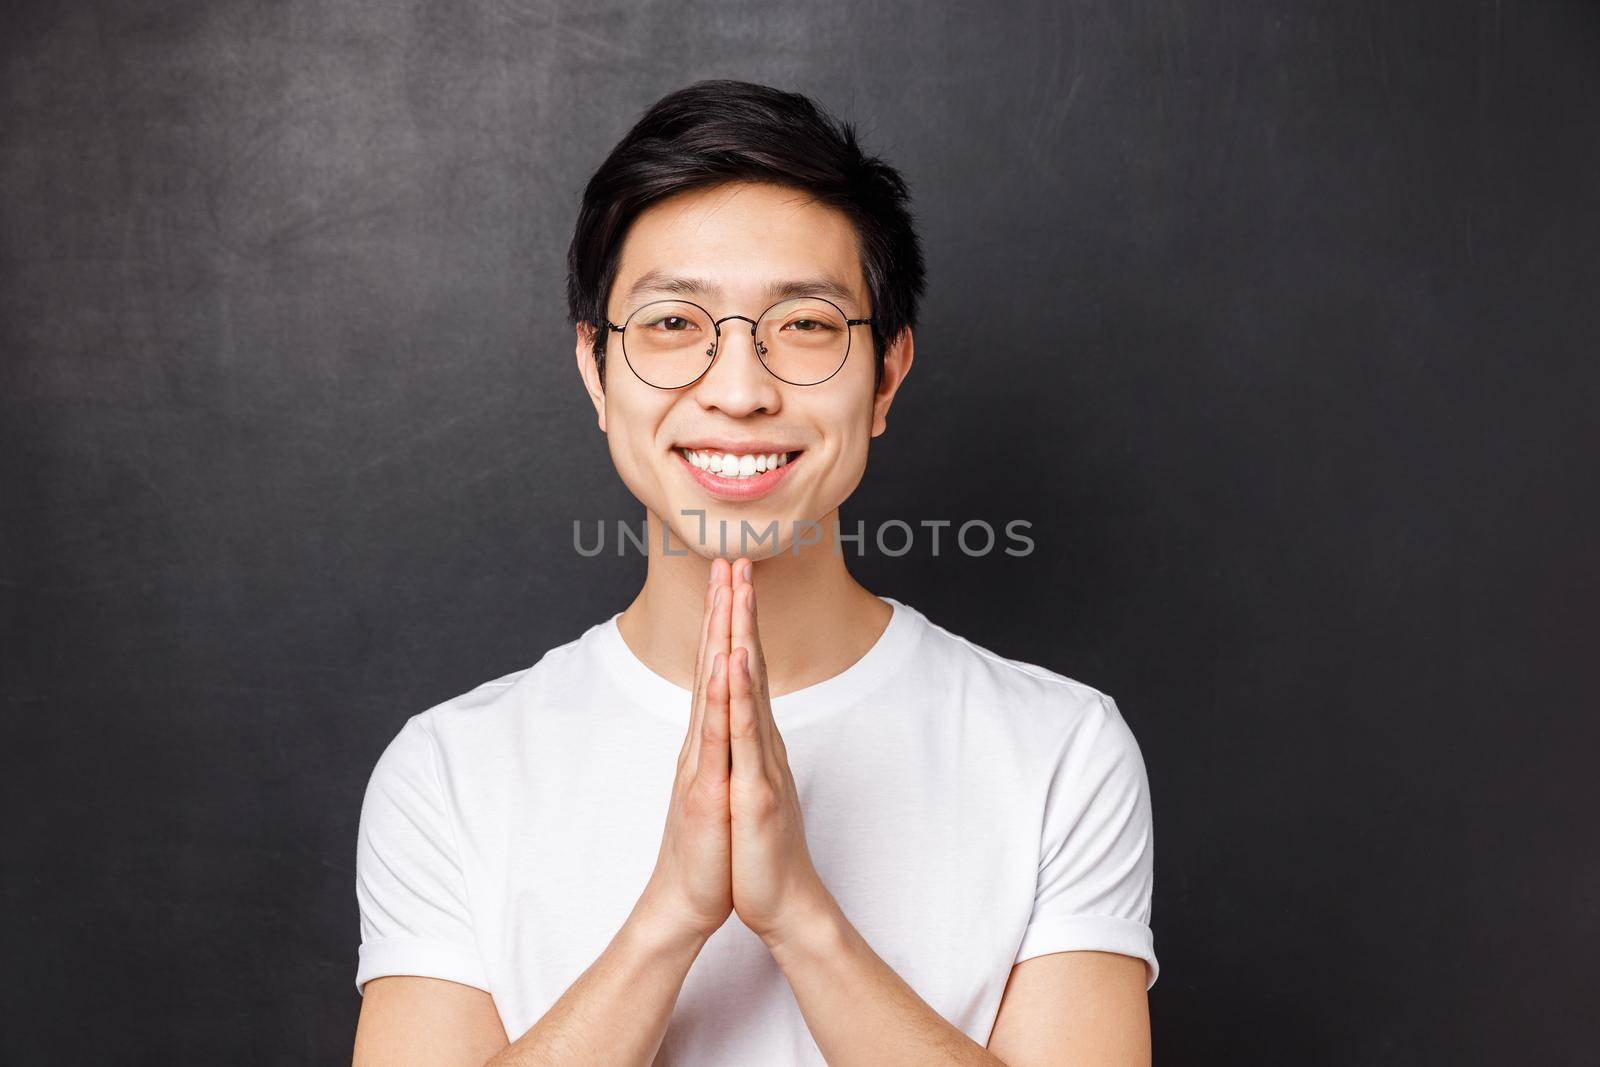 Close-up portrait of friendly, polite and relaxed young asian man with happy smile, hold hands in pray, palms pressed together over chest, smiling at camera, say namaste, praying.